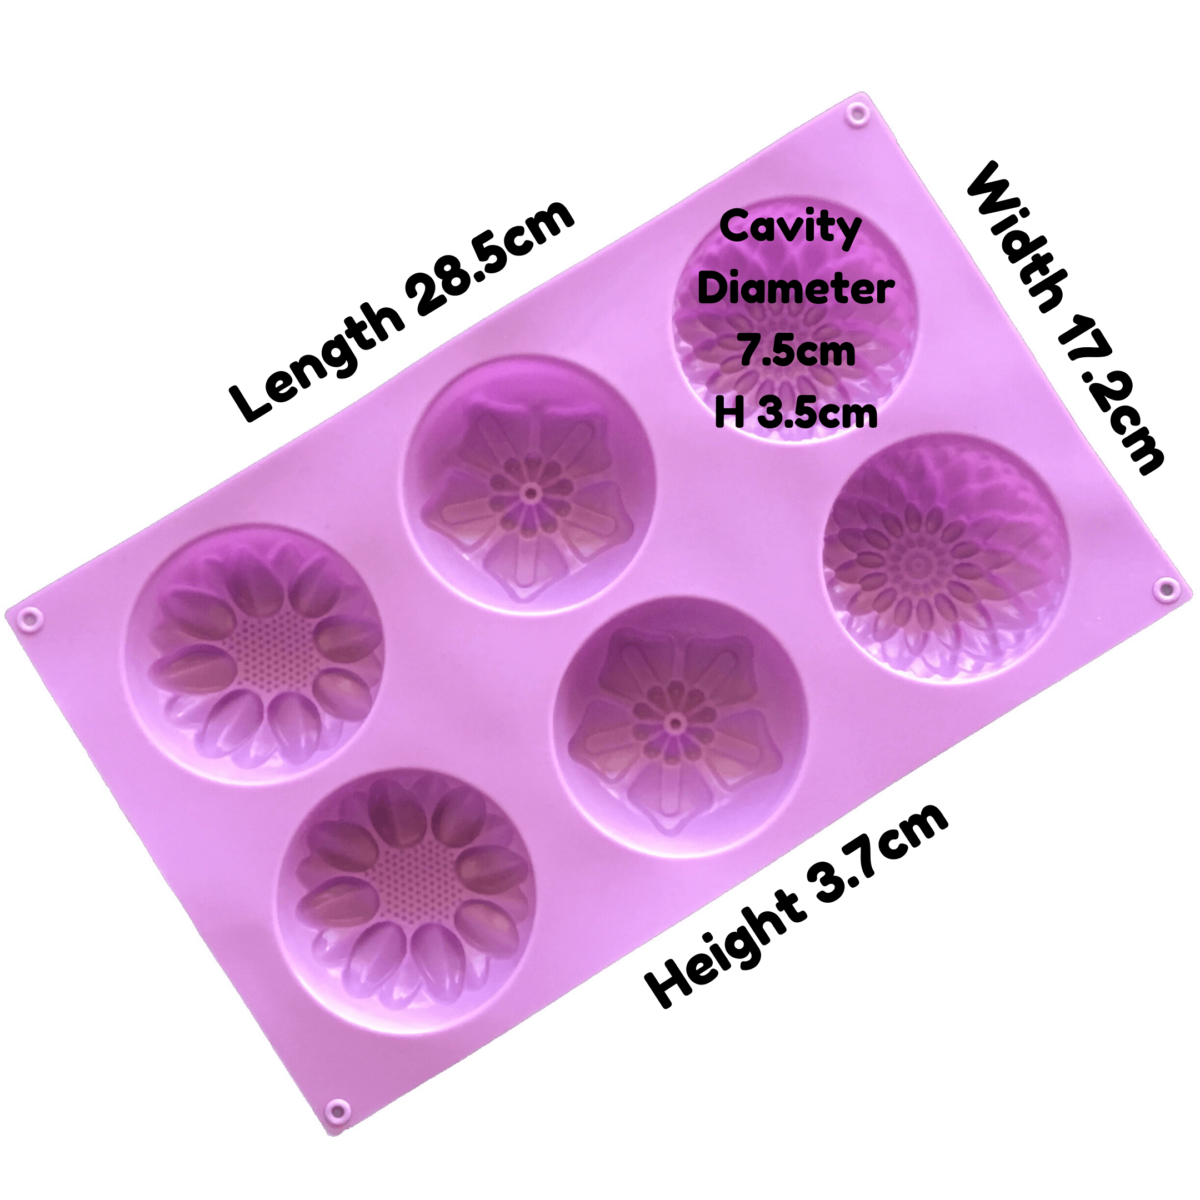 written dimensions of large purple silicone mould with six cavites - two each of dahlia, poinsettia and calendula flowers